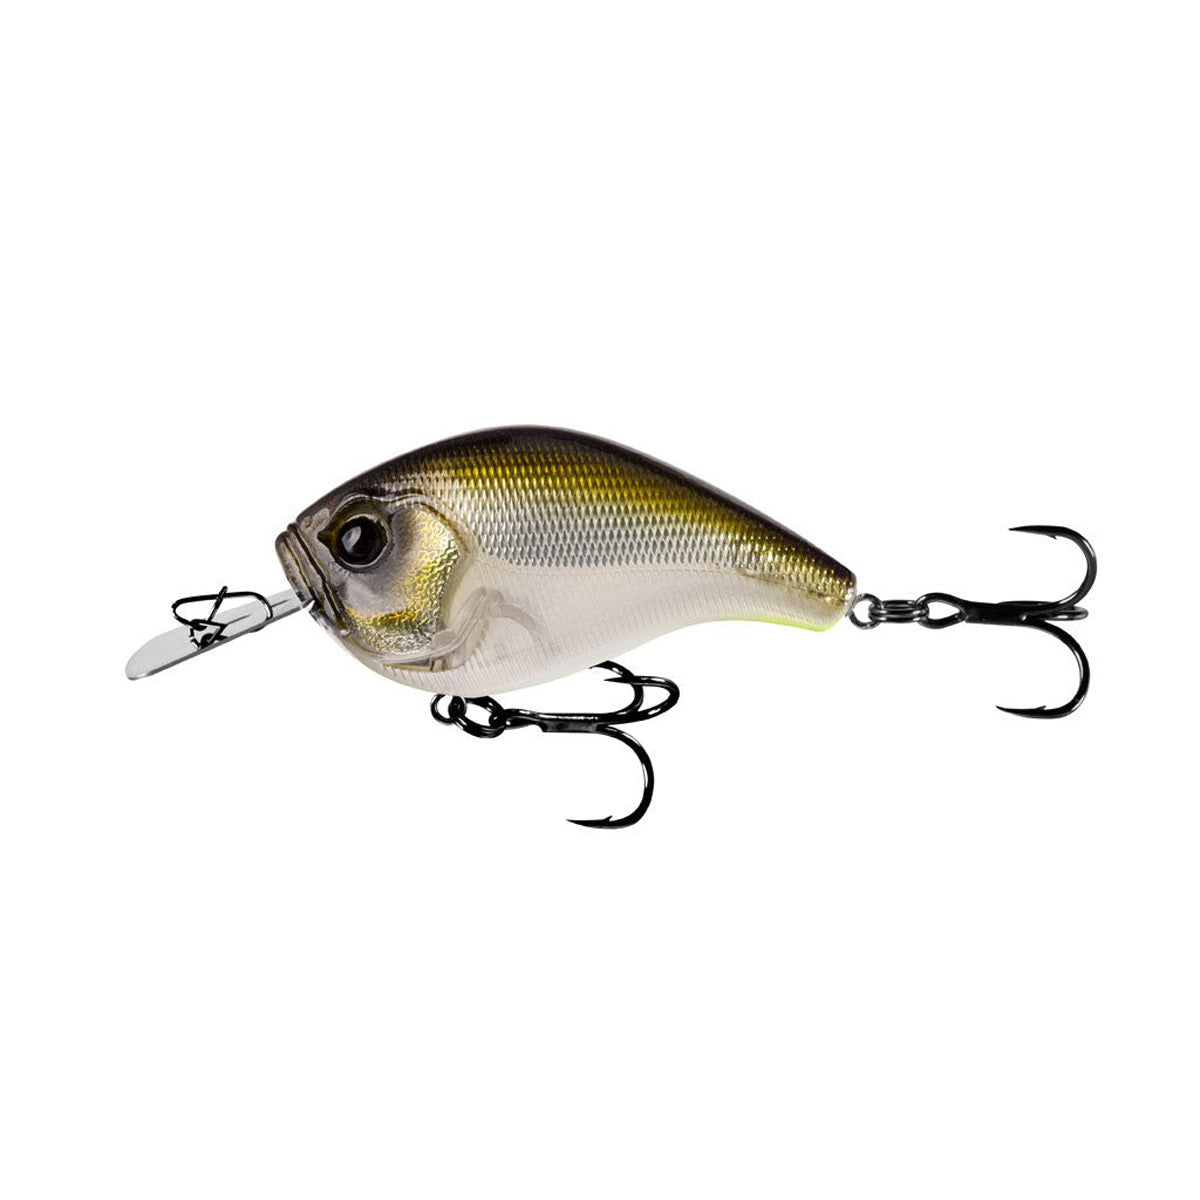 13 Fishing Jabber Jaw Lure - Deep - Lucky Charm - Mansfield Hunting & Fishing - Products to prepare for Corona Virus